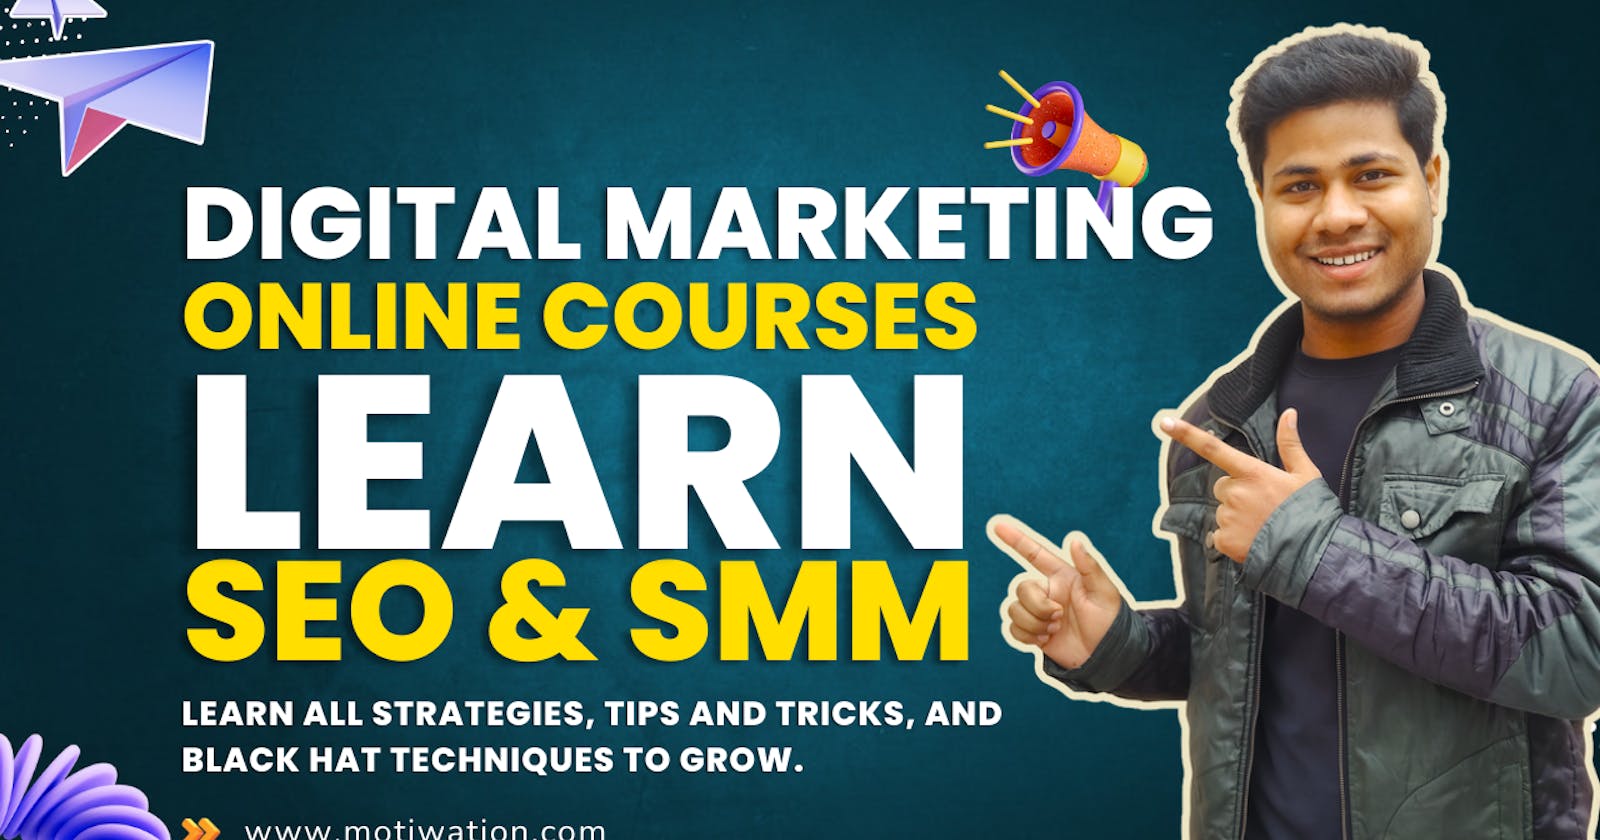 Best Digital Marketing Course in India